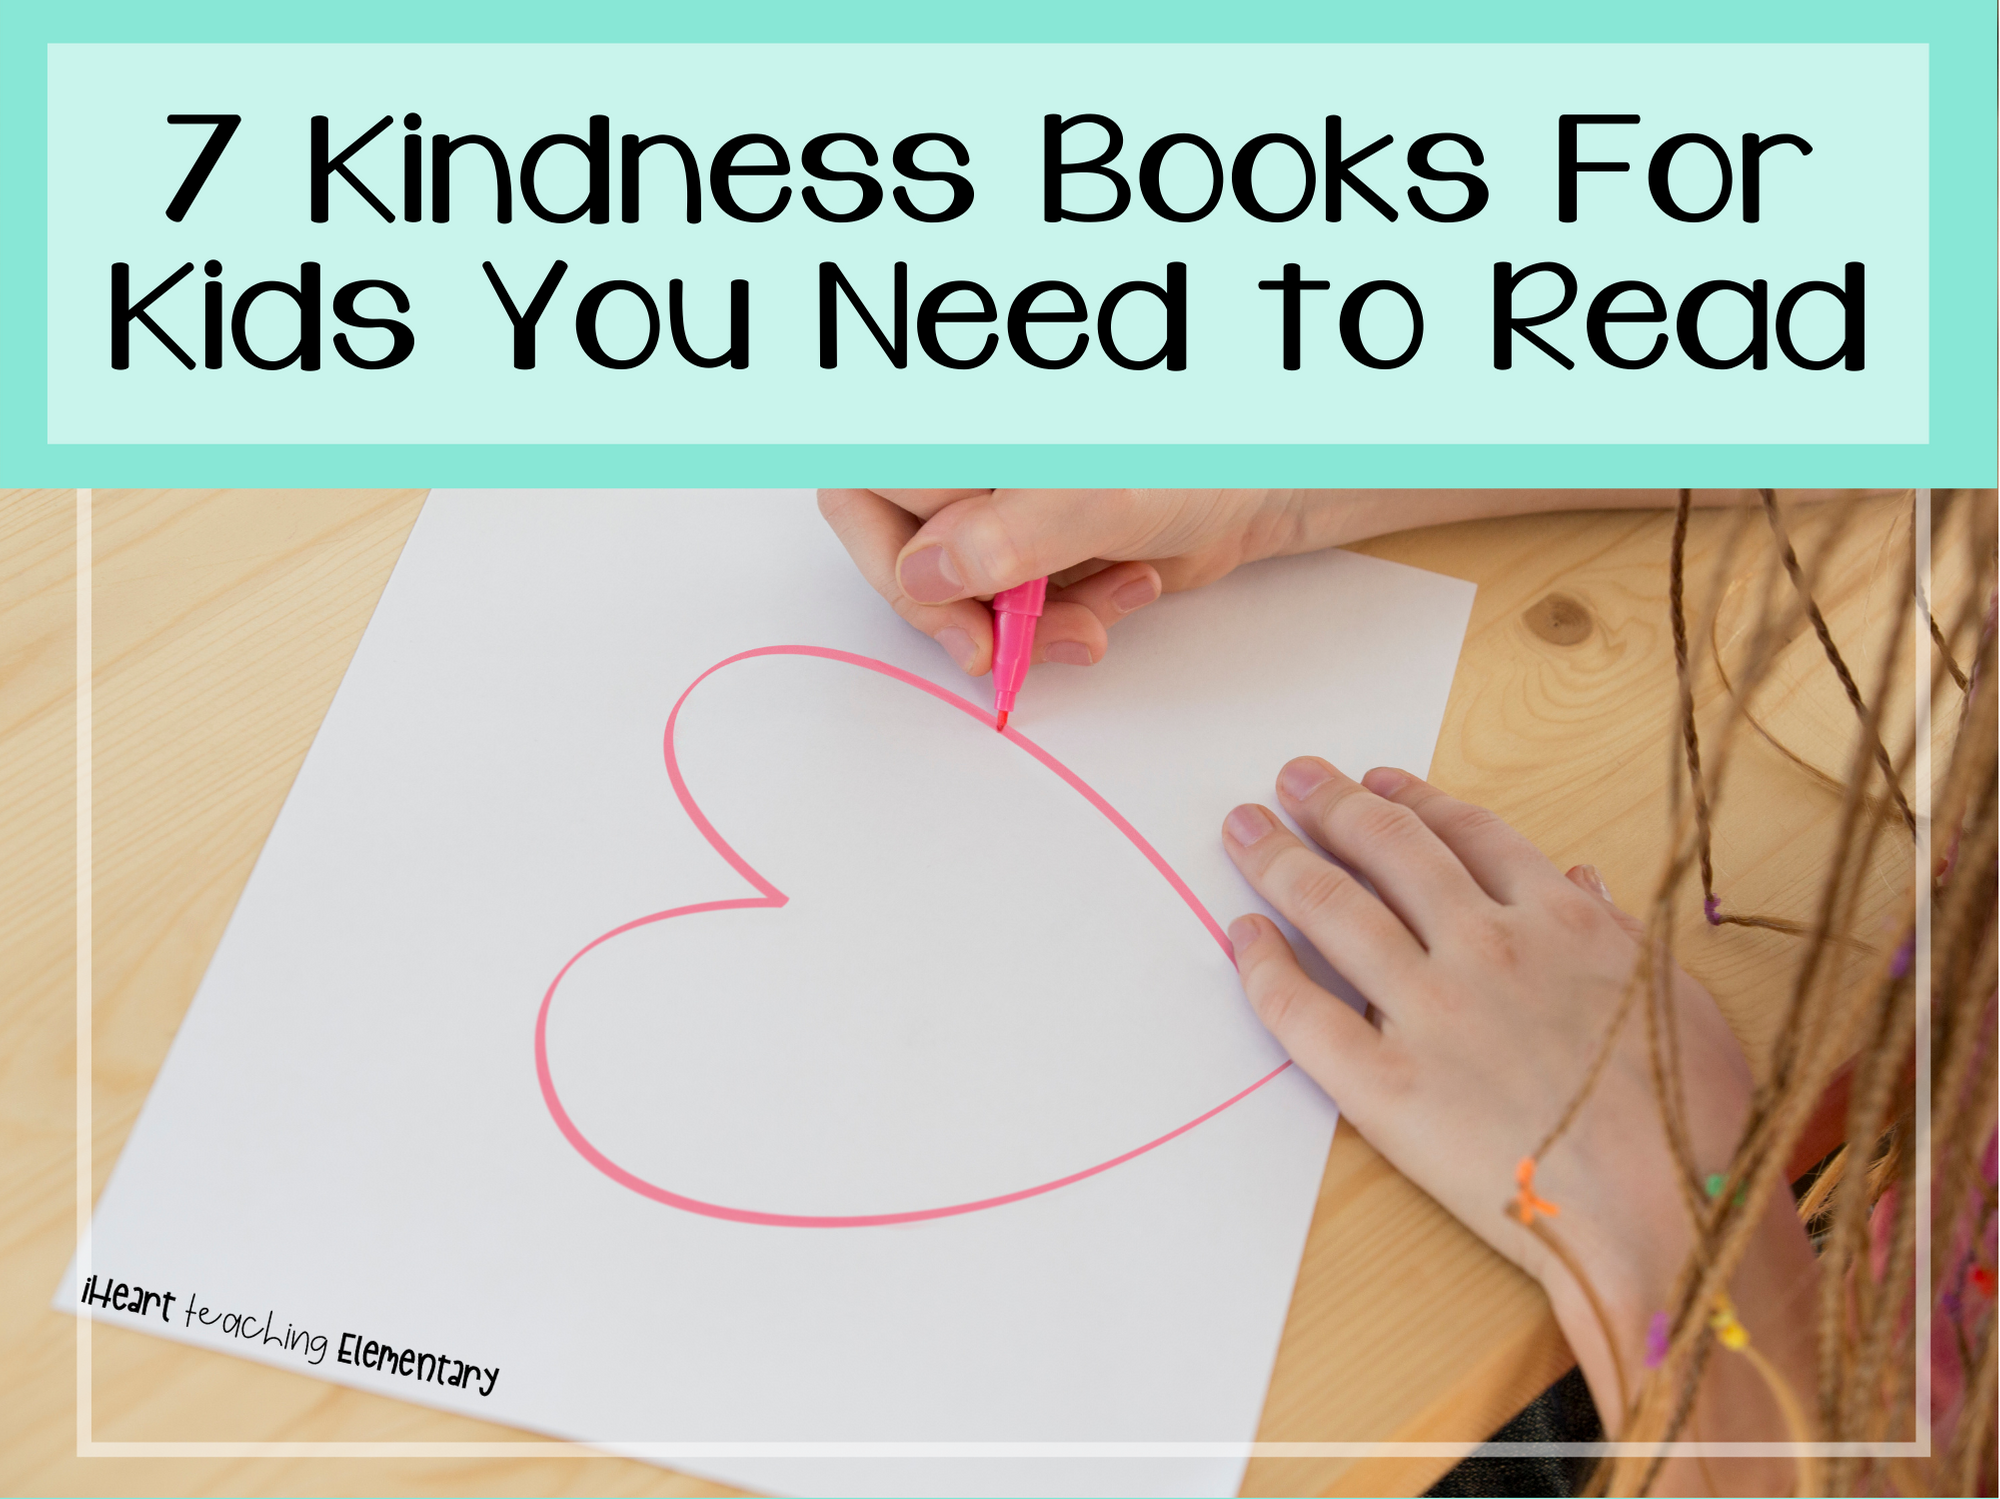 You are currently viewing 7 Kindness Books for Kids You Need to Read